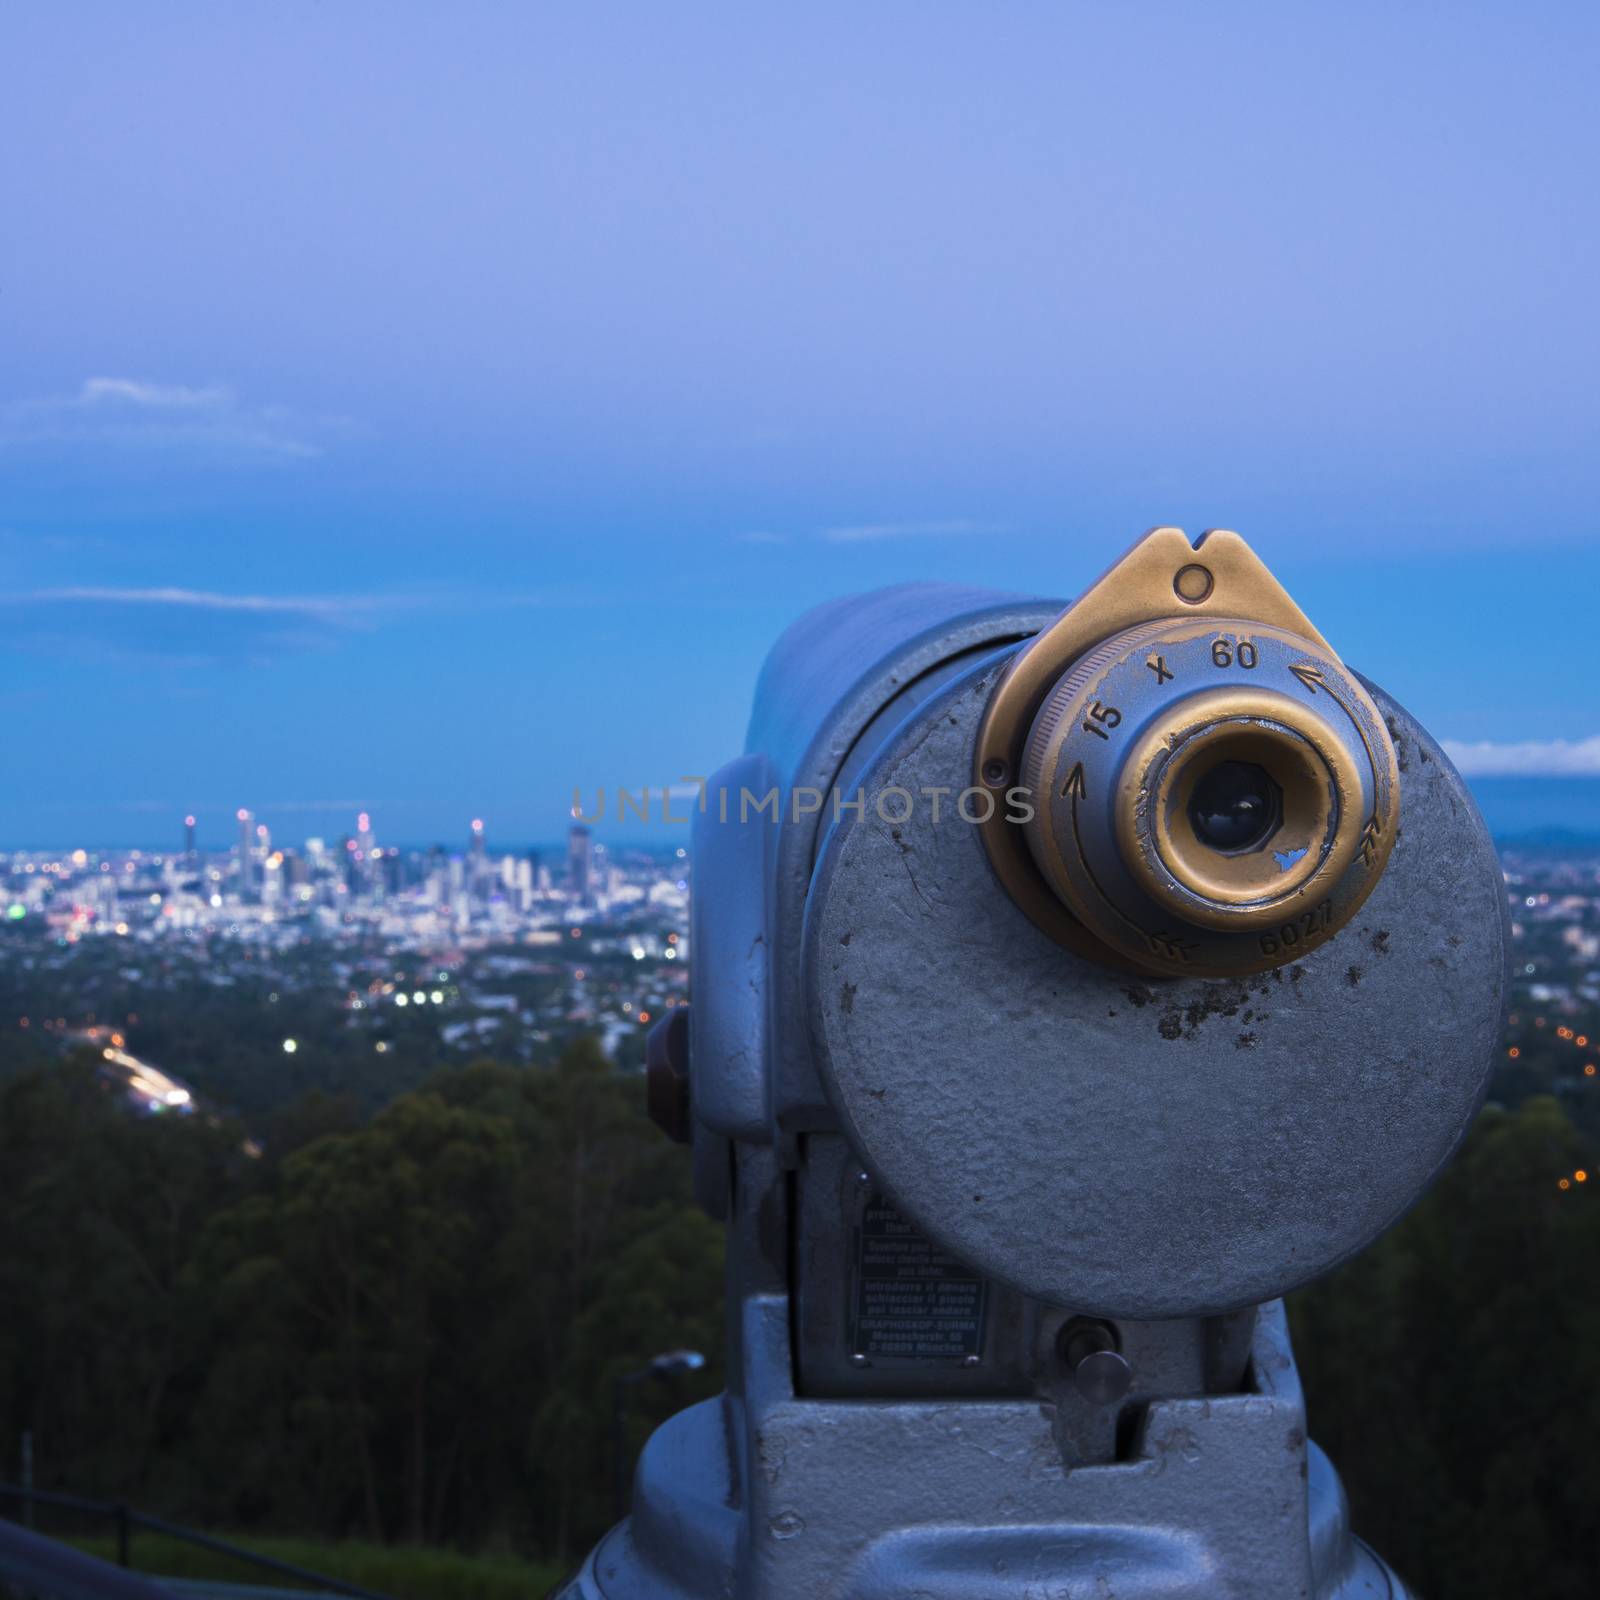 View of Brisbane and surrounding suburbs from Mount Coot-tha at night. Queensland, Australia.